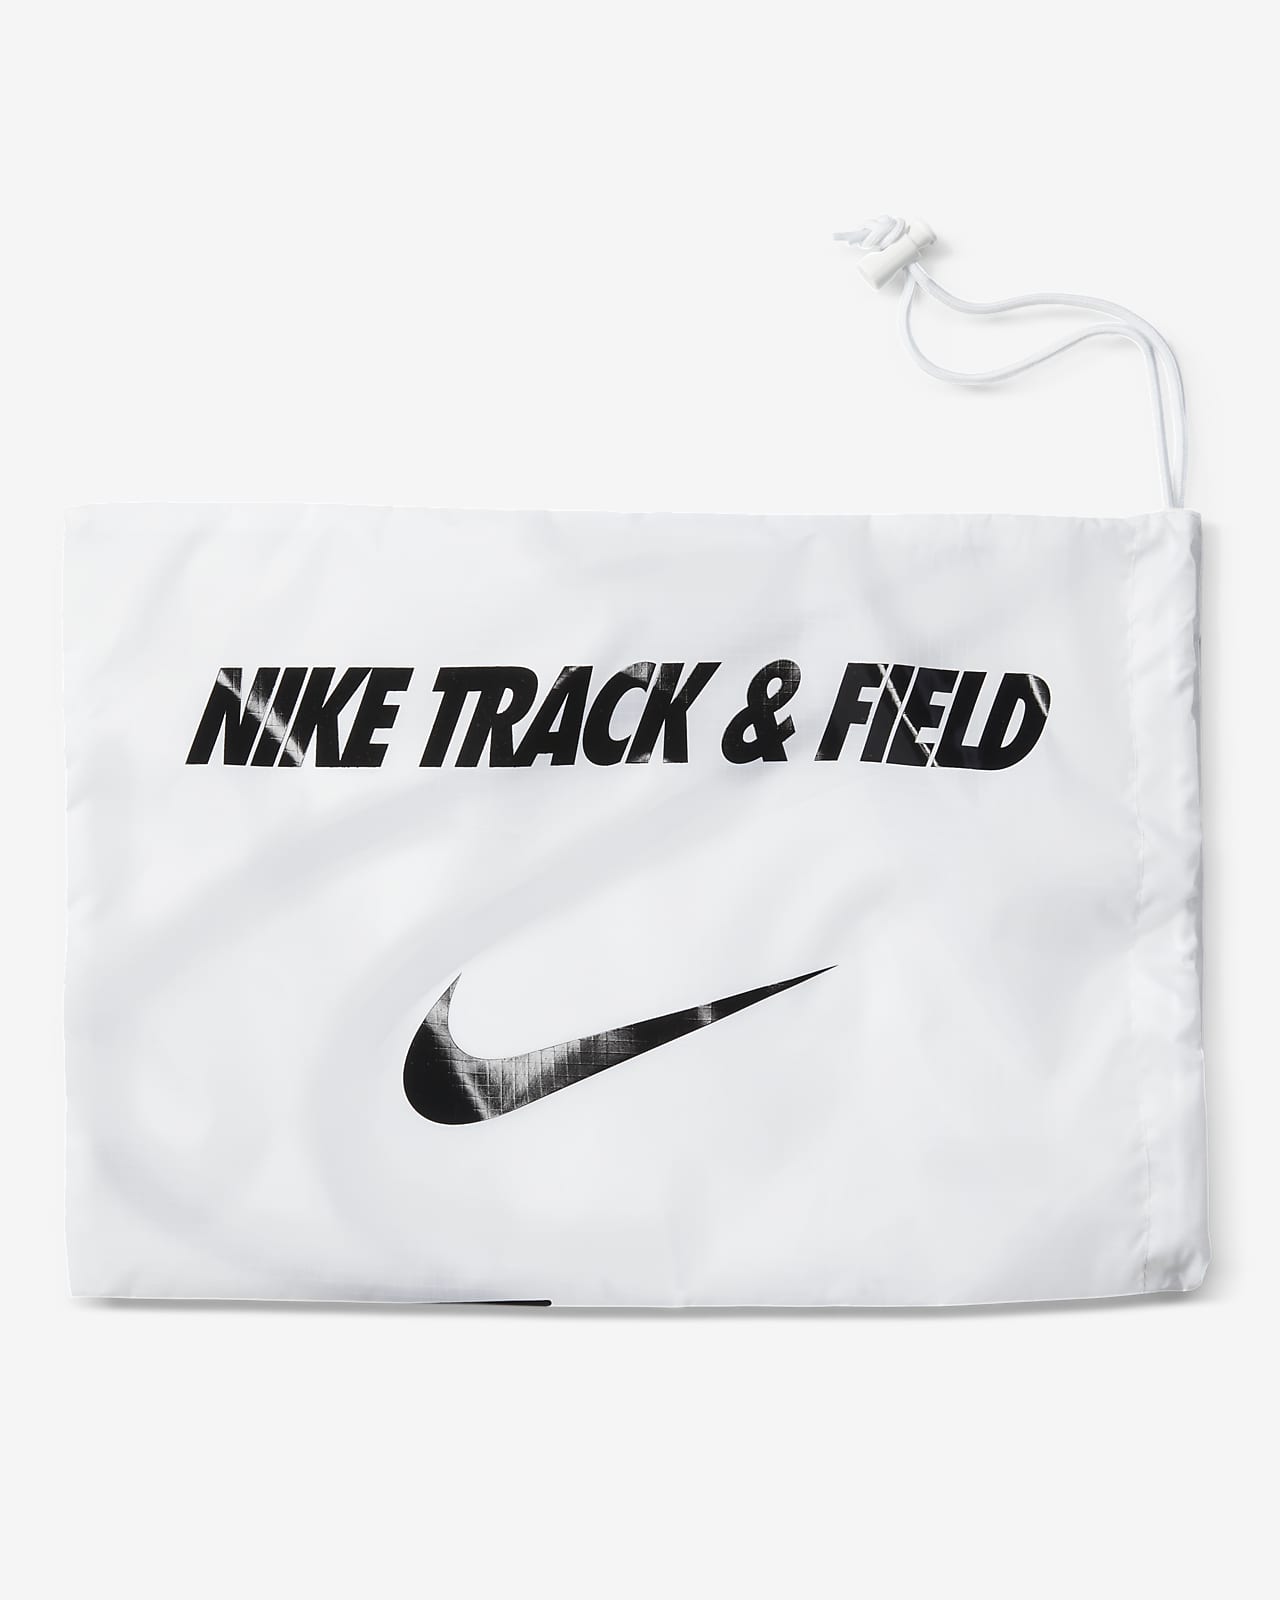 nike track and field throwing shoes